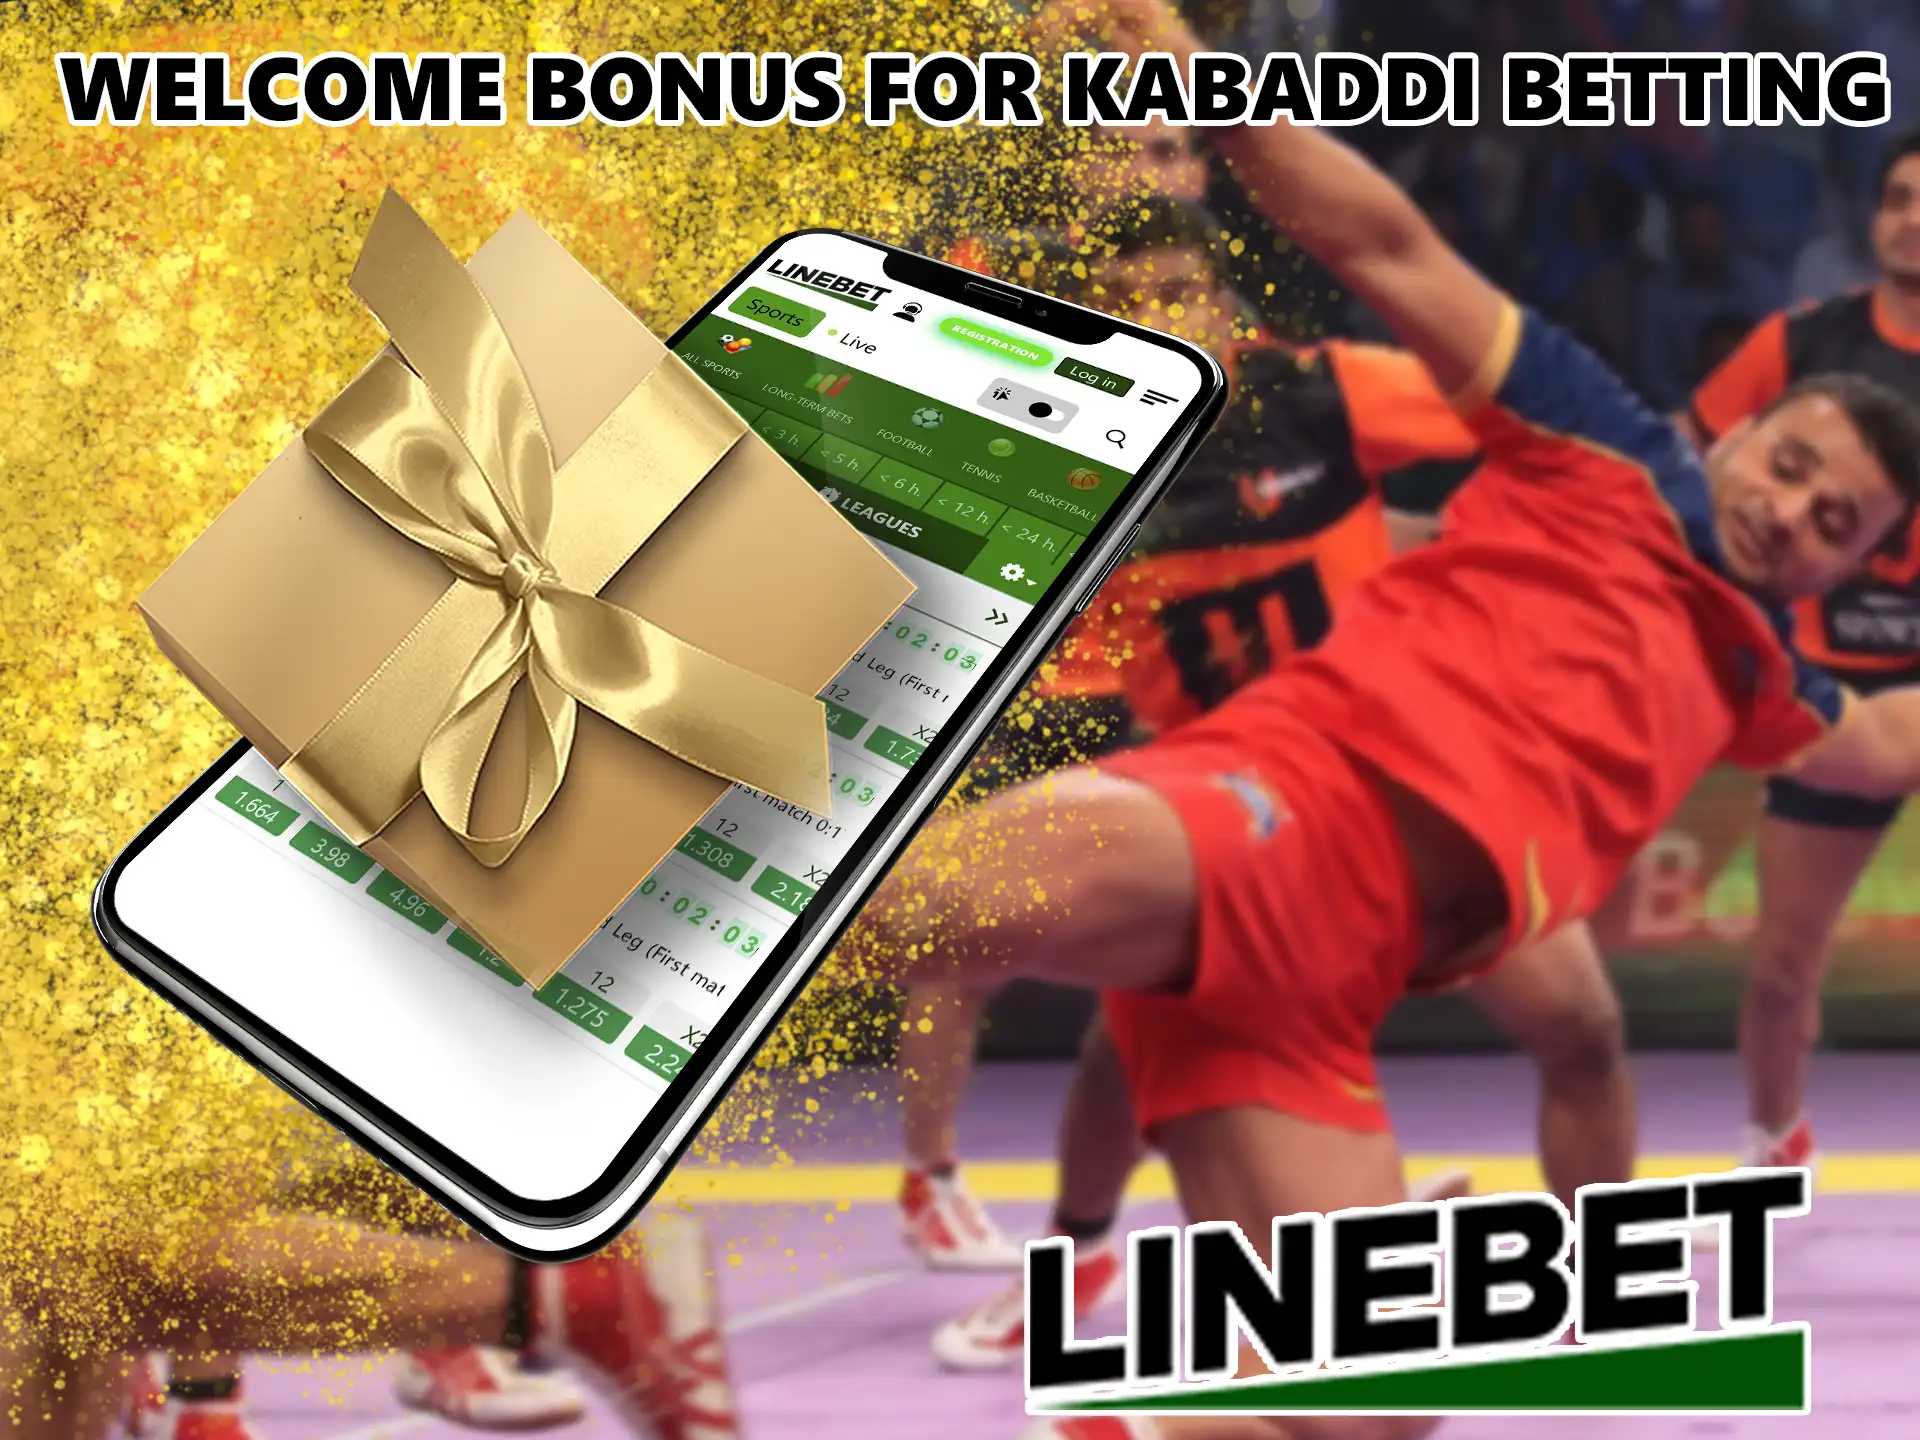 New players from India can get a pleasant surprise at Linebet, a one-time addition to their balance of INR 8,862.